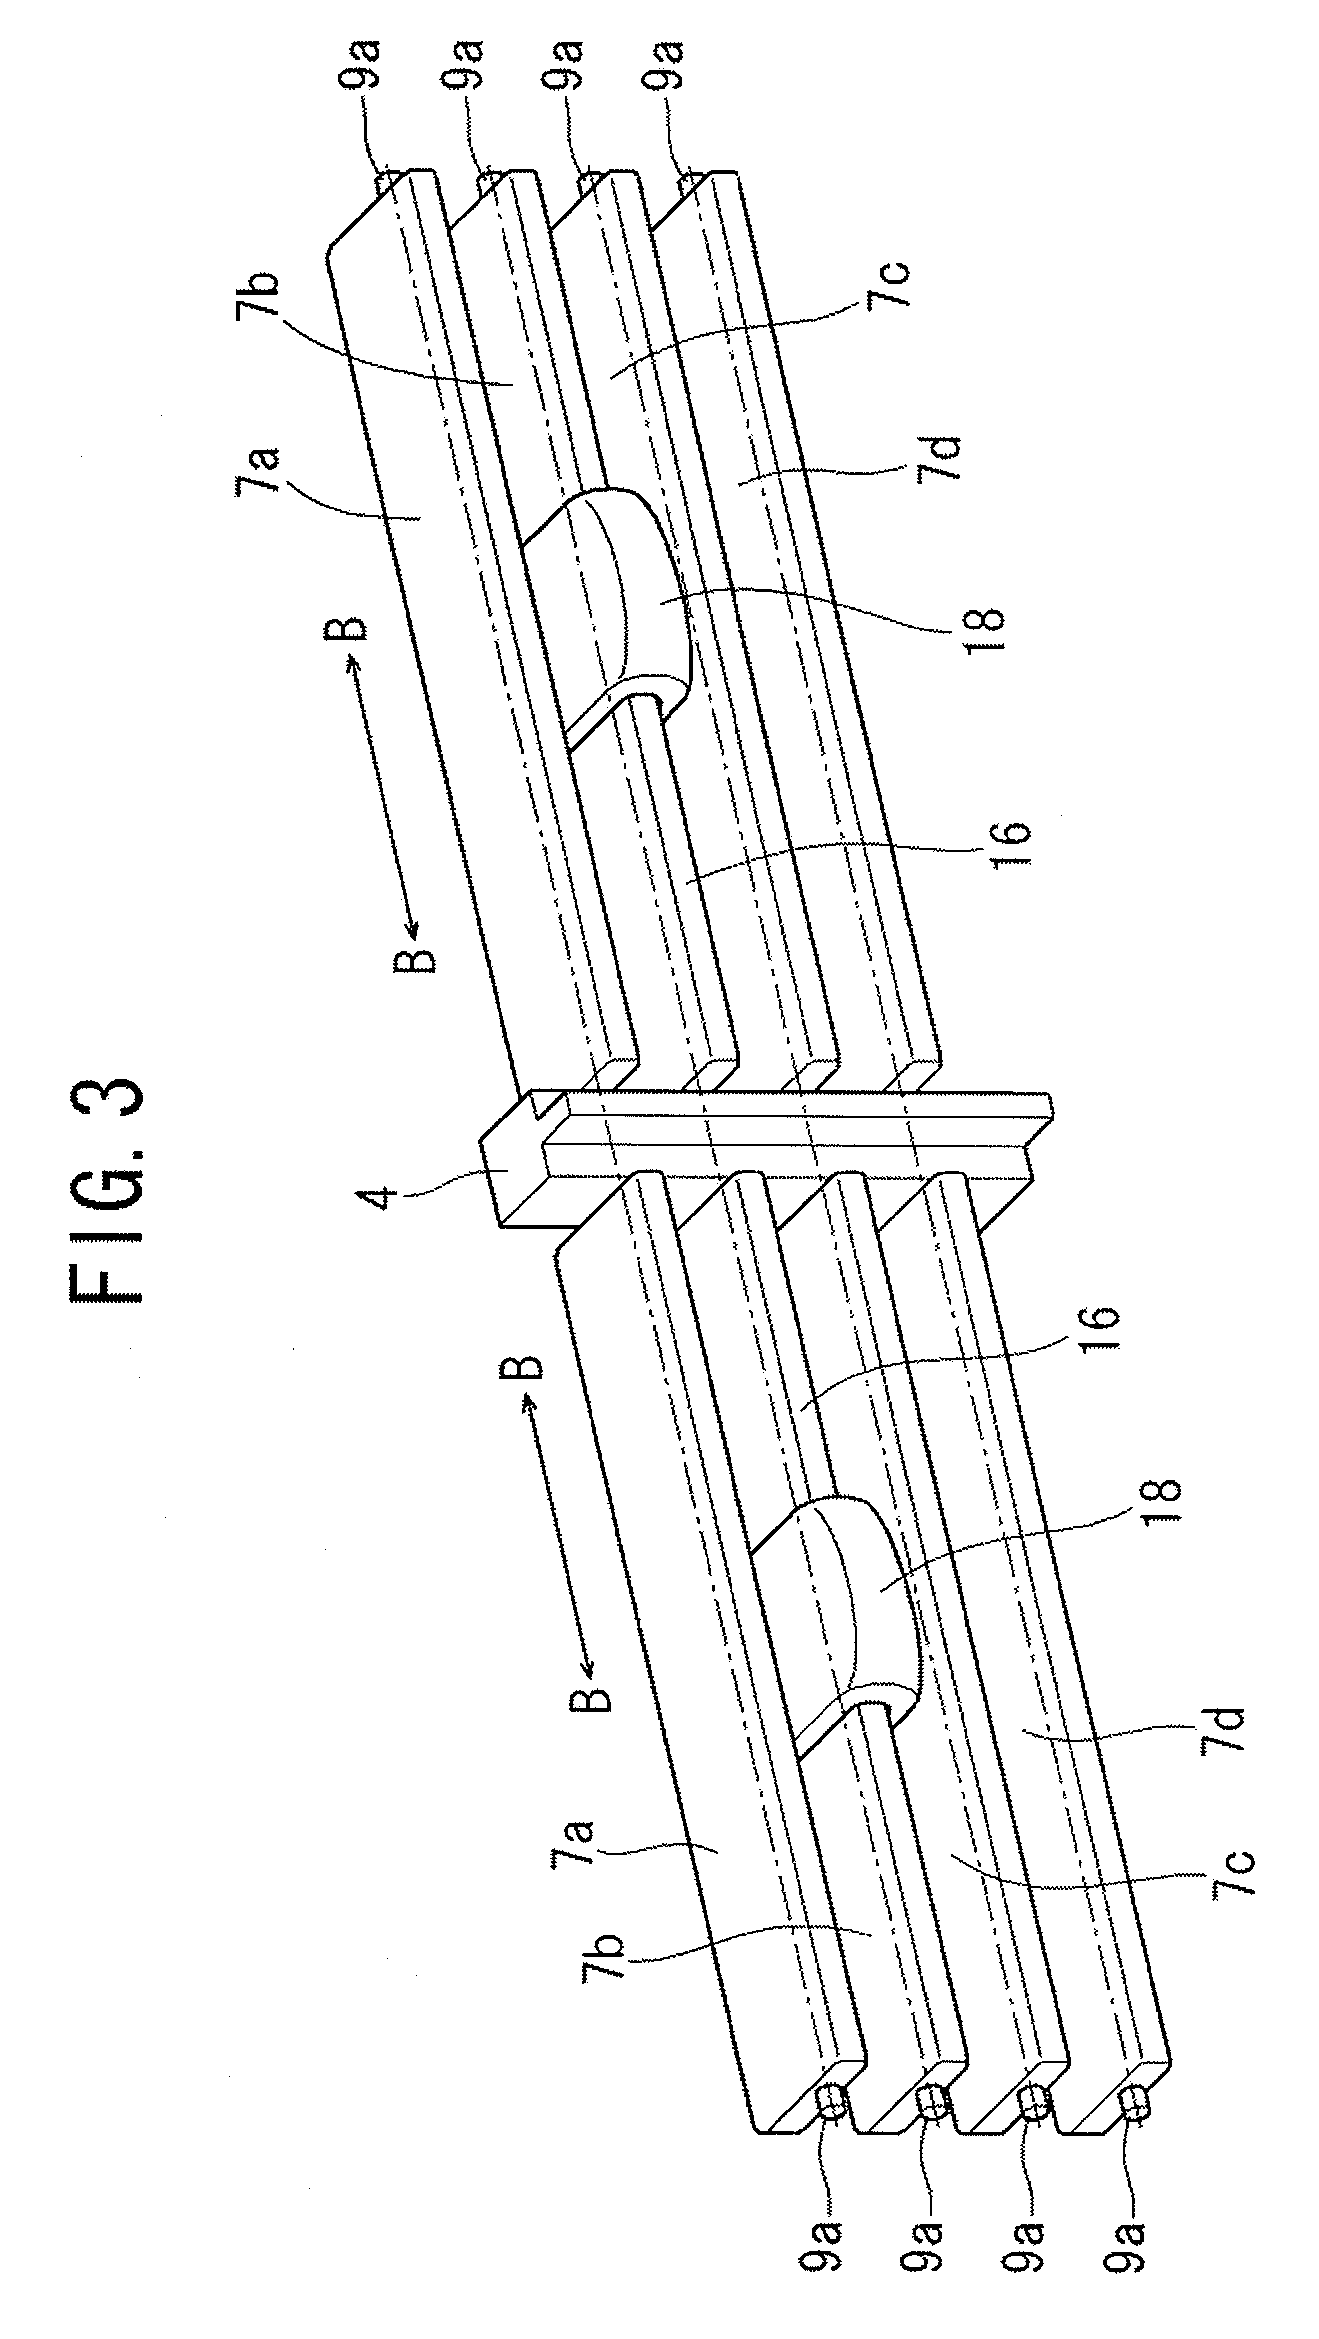 Supporting structure for adjustable air guide vanes